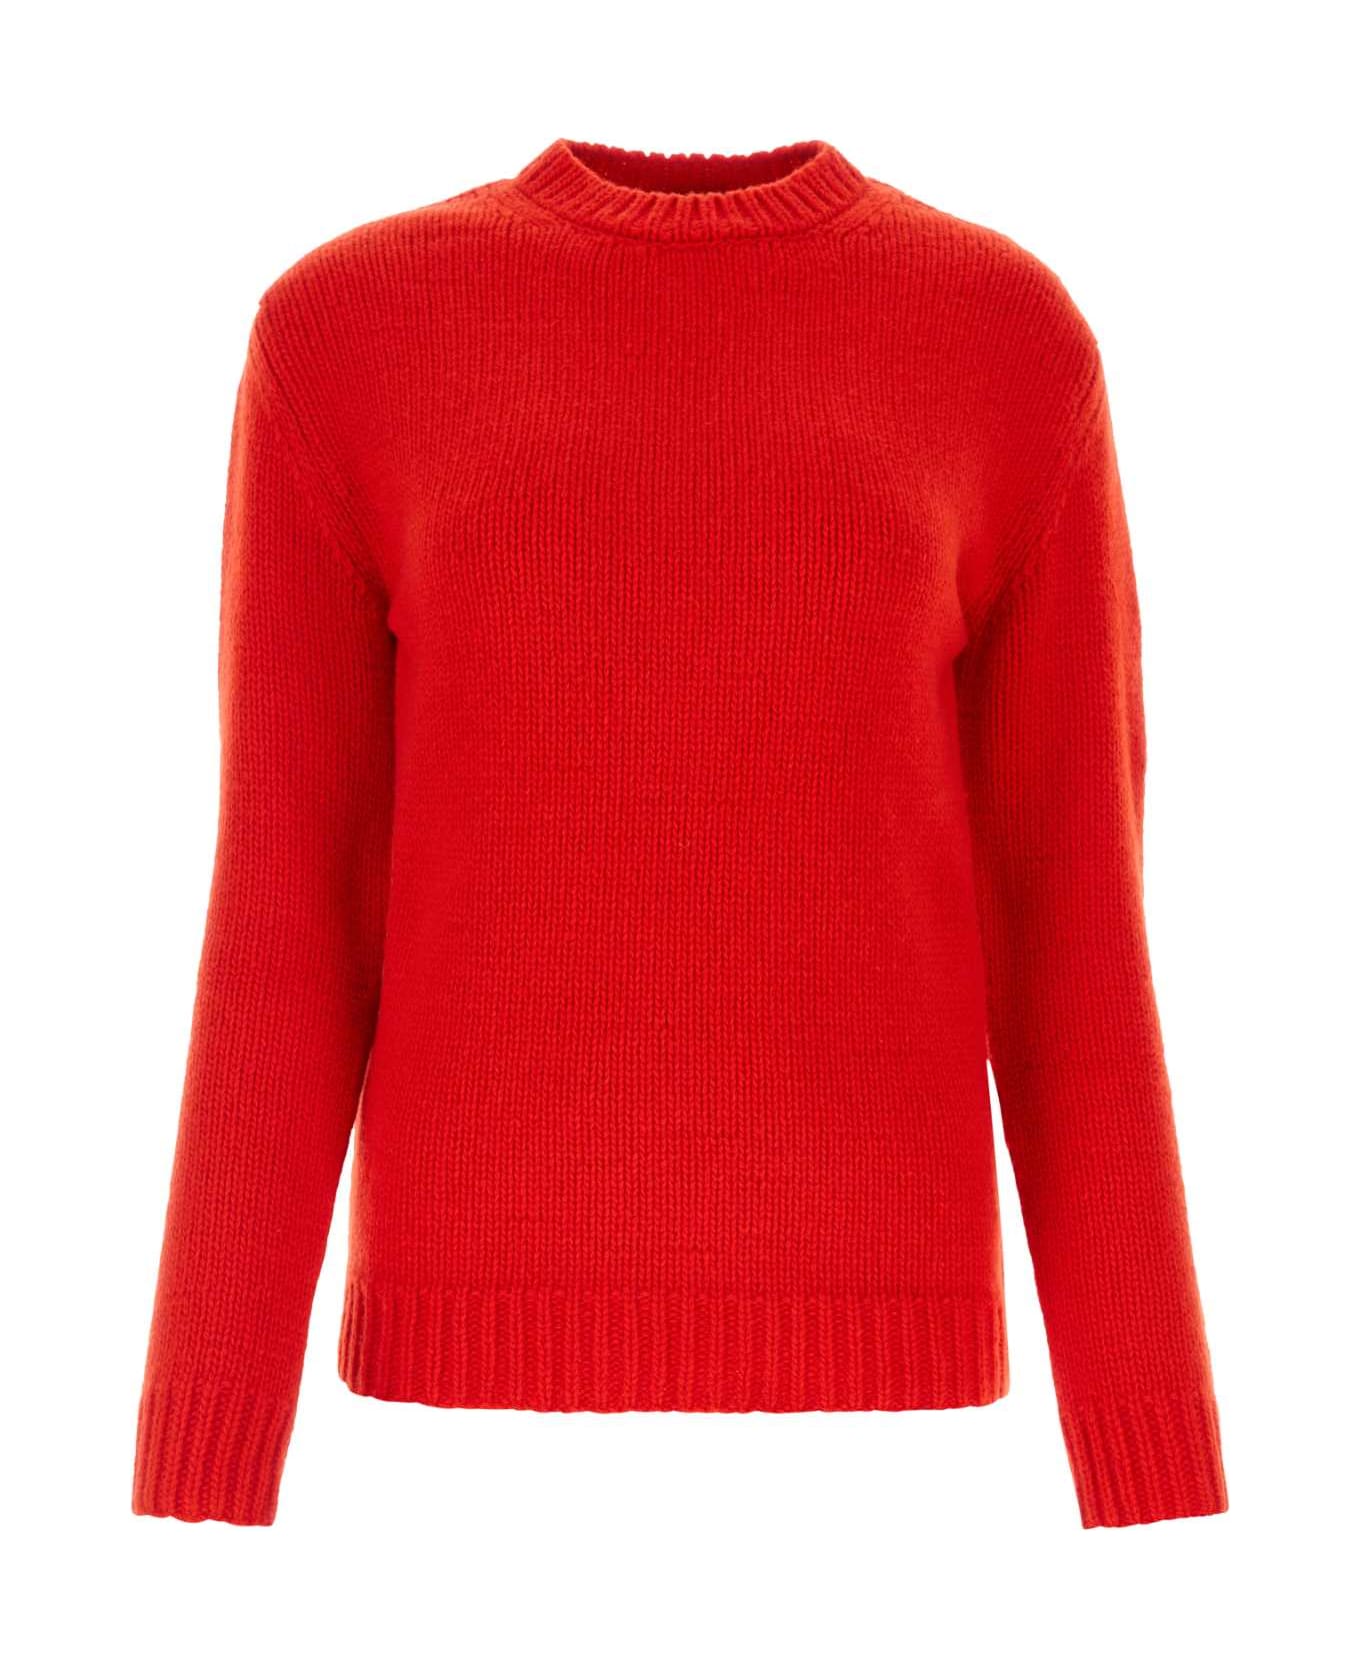 Gucci Red Wool Sweater - REDIVORY